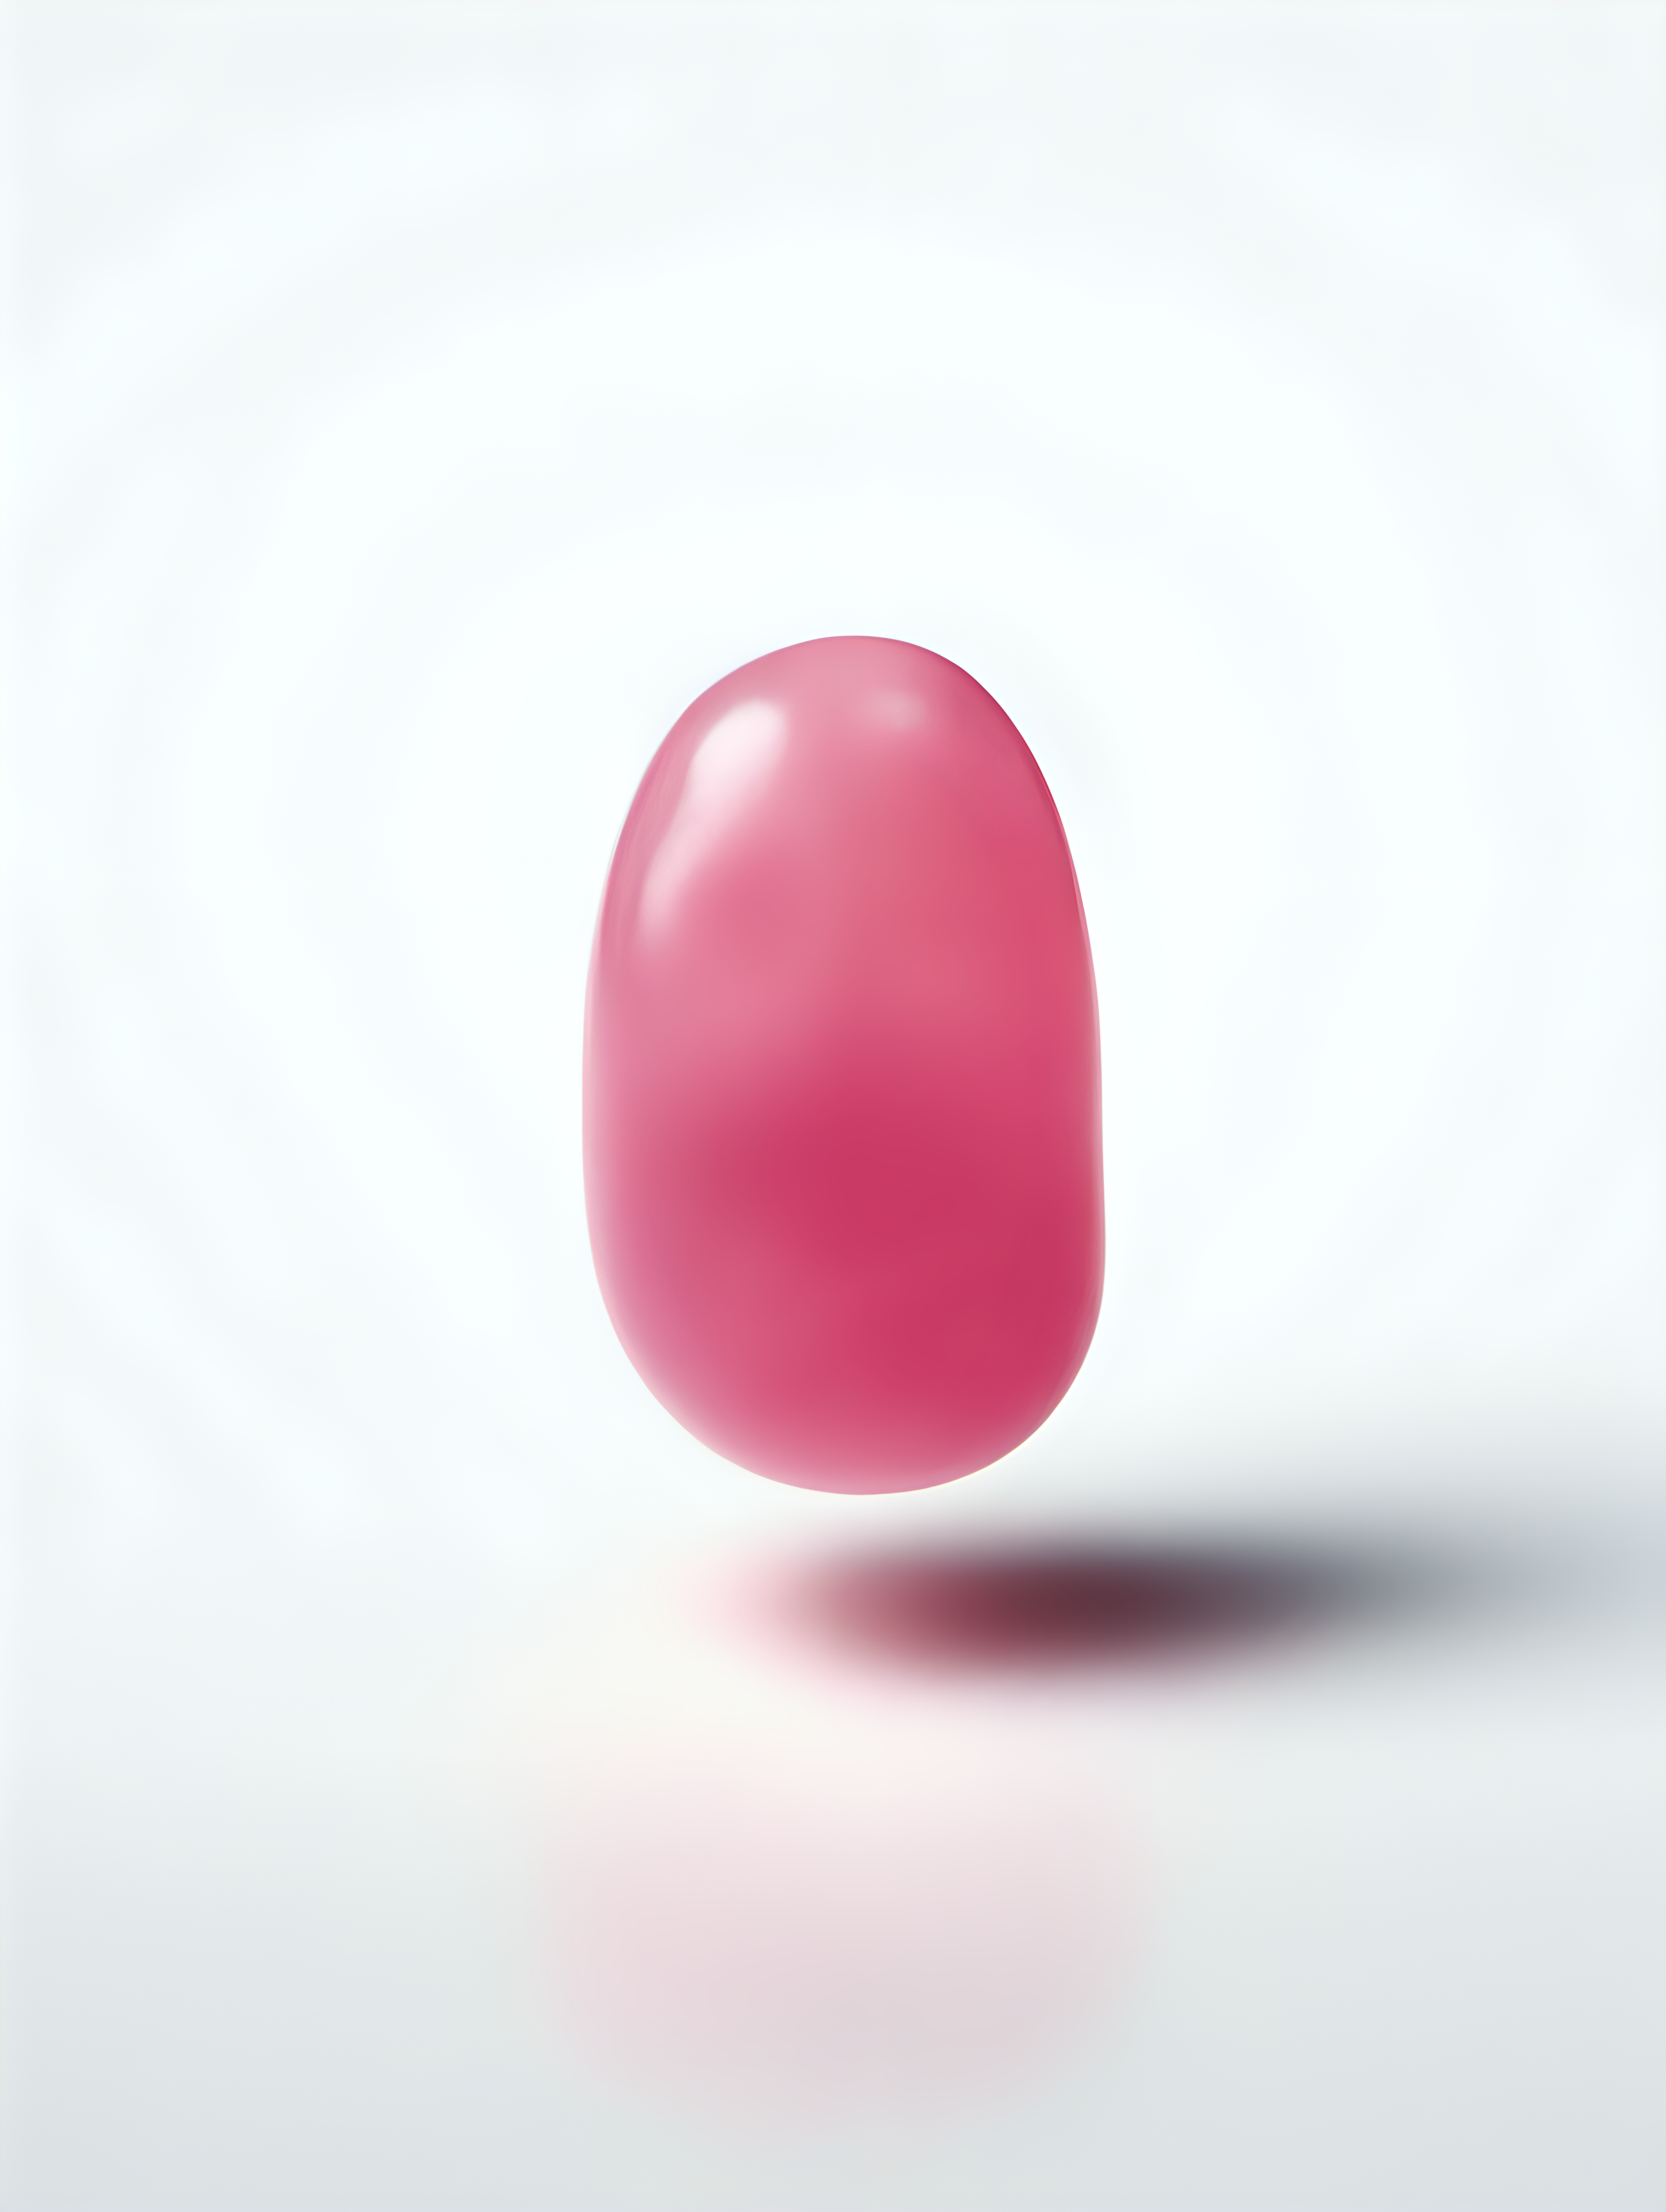 ARTISTIC IMAGE OF A SINGLE PINK JELLYBEAN ON A WHITE BACKGROUND
 